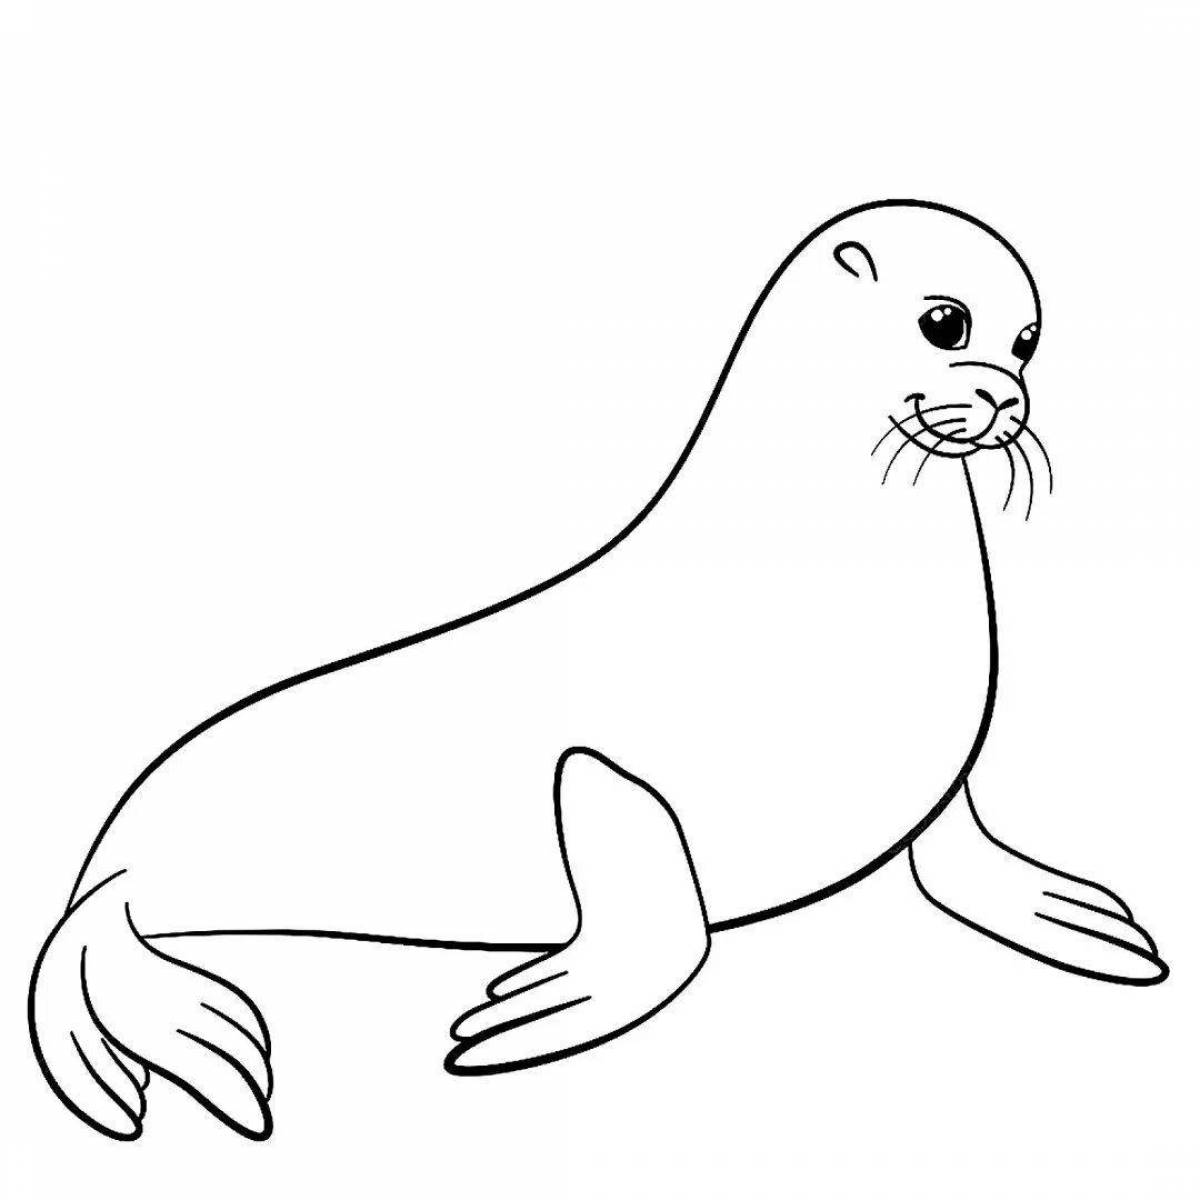 Shiny fur seal coloring book for kids